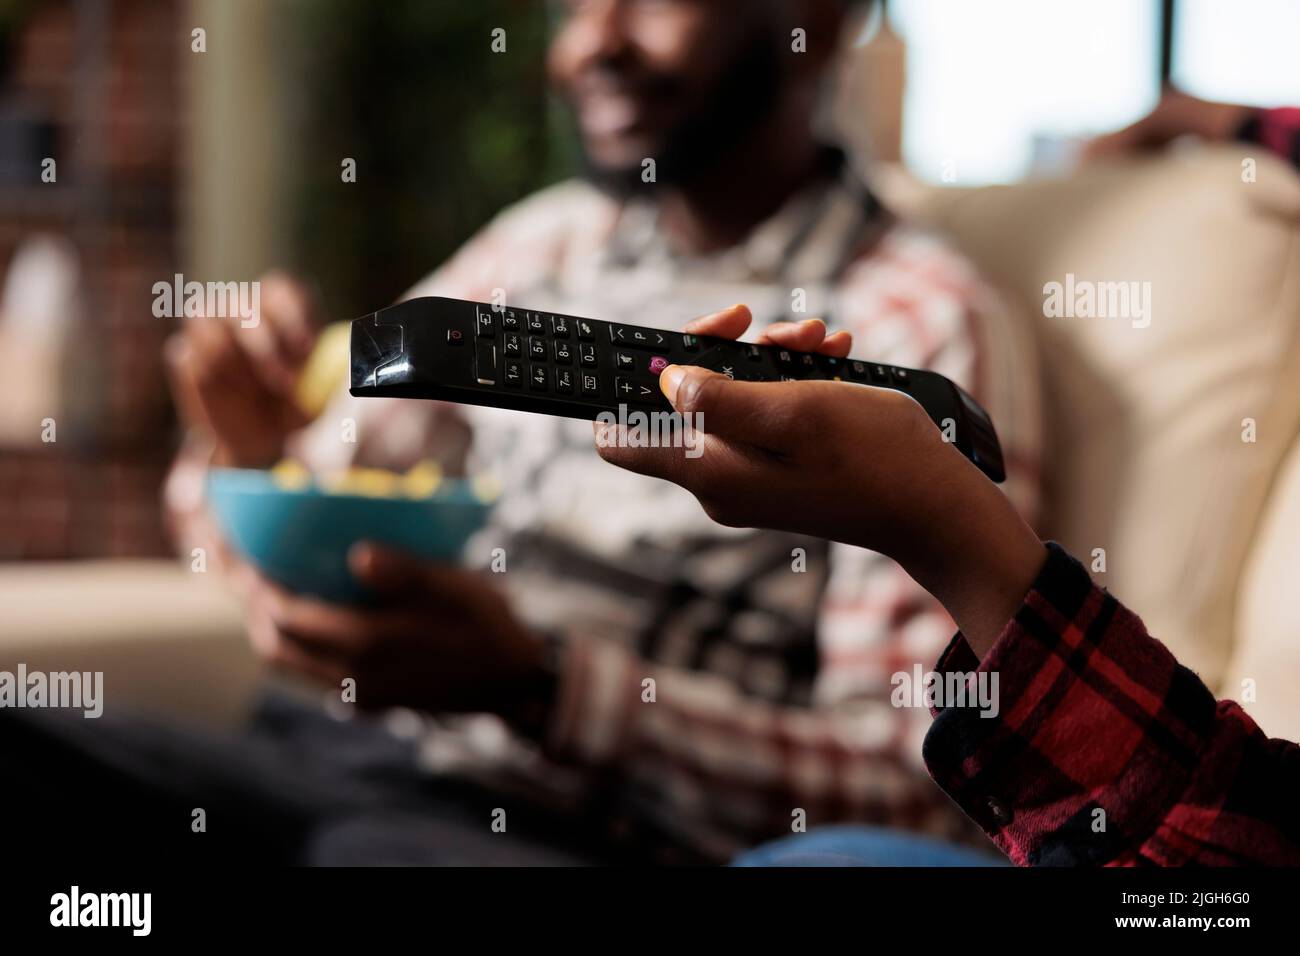 Girlfriend holding tv remote control to switch channel program and find movie on television to watch. Eating takeaway delivery from fast food and watching film together. Close up. Stock Photo